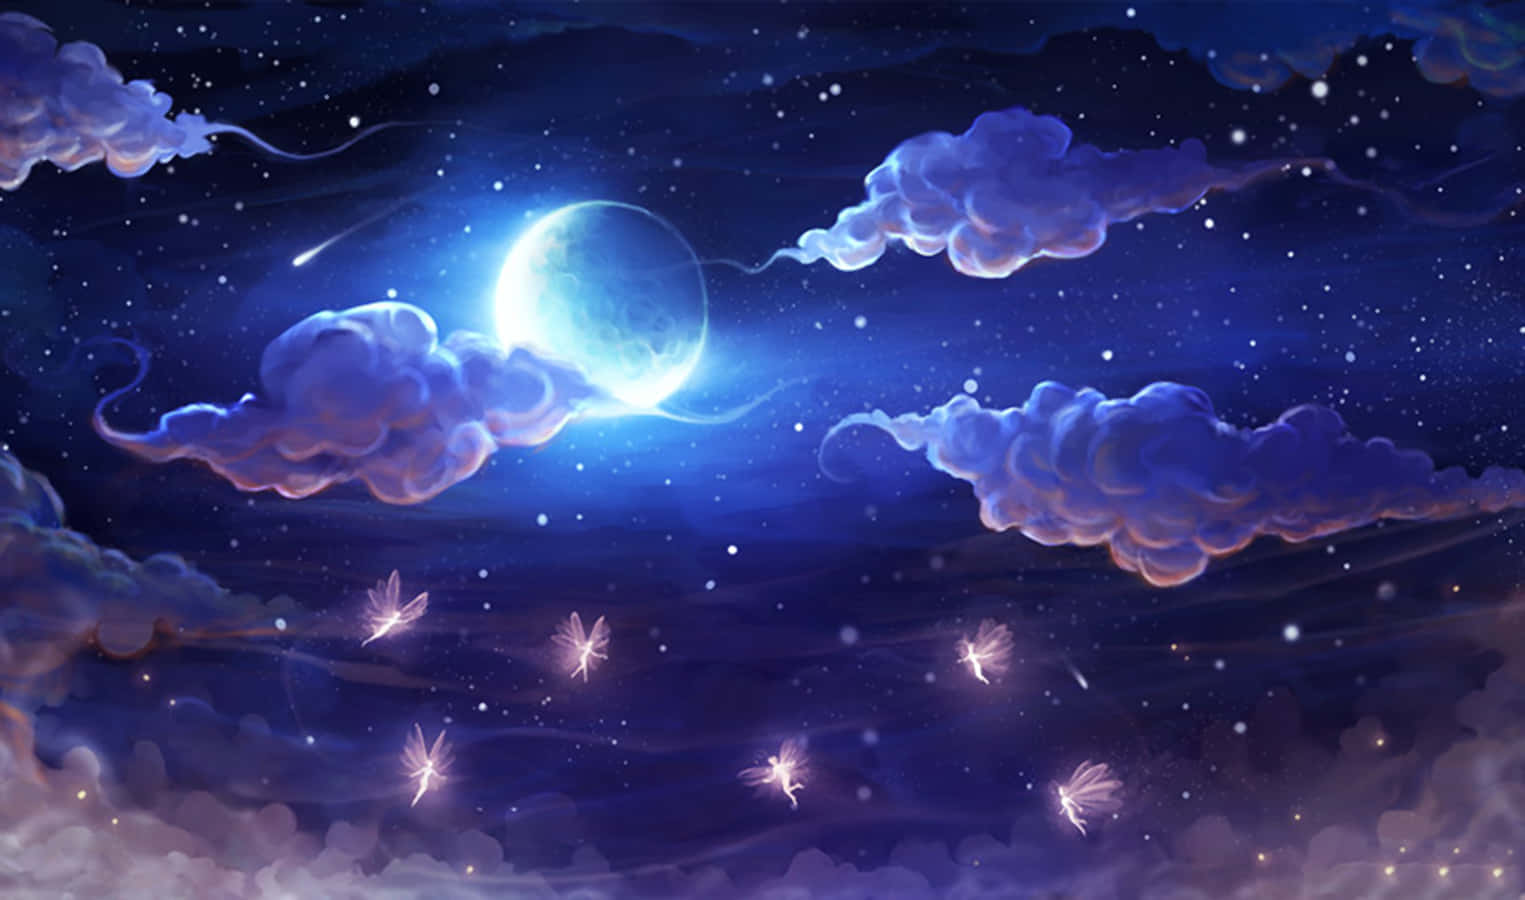 Magical Night Sky With Many Glowing Fairies Background